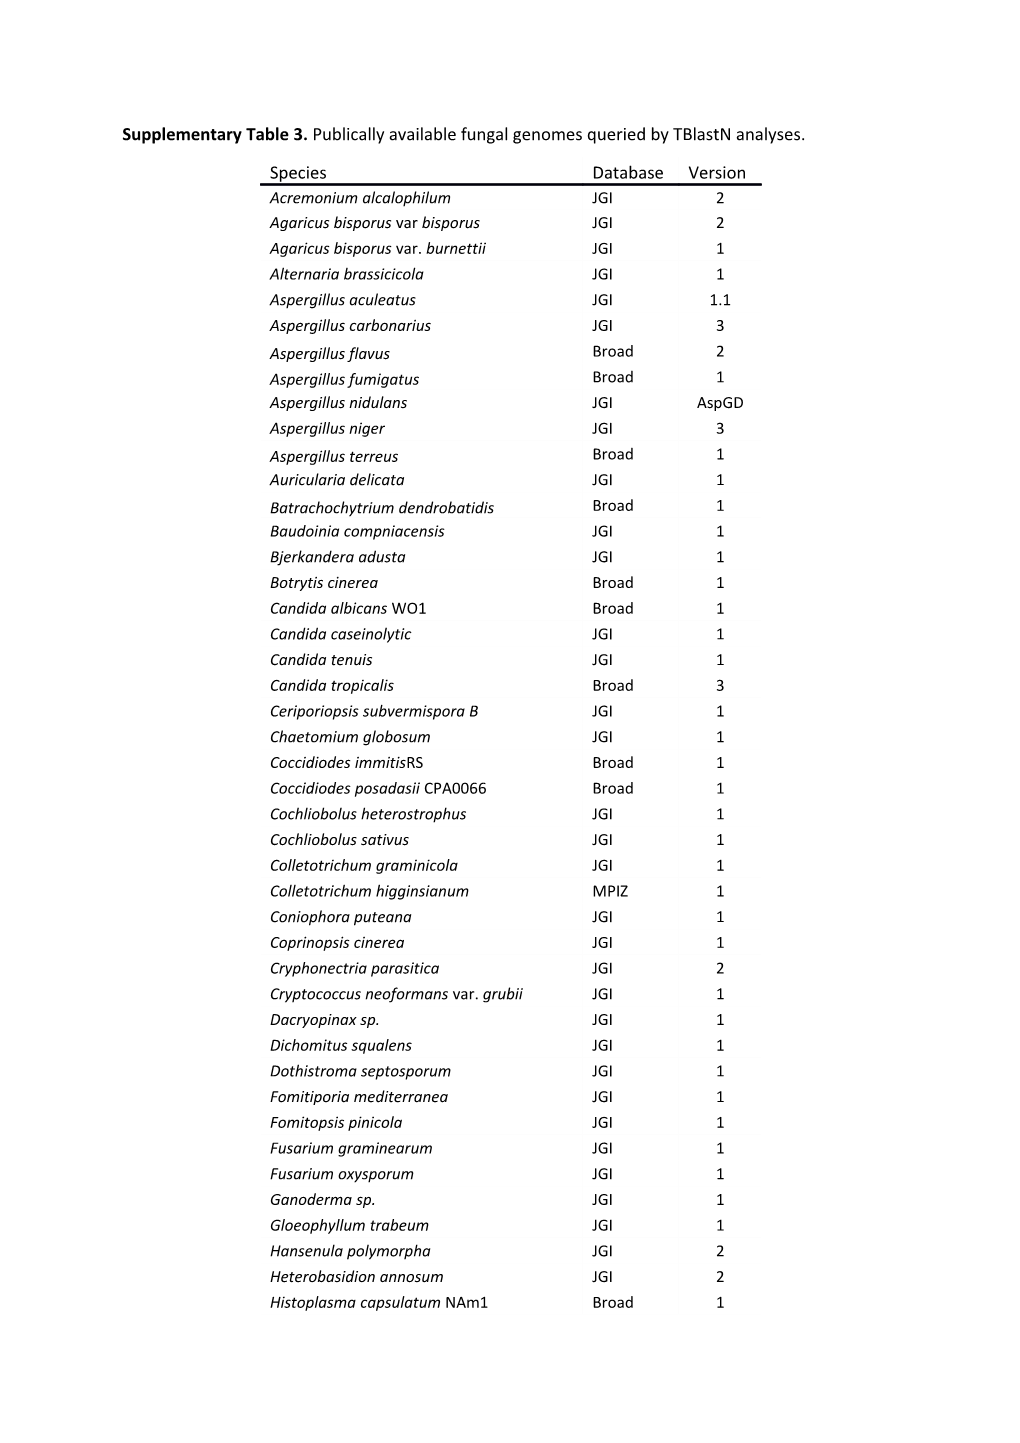 Supplementary Table 3. Publically Available Fungal Genomes Queried by Tblastn Analyses